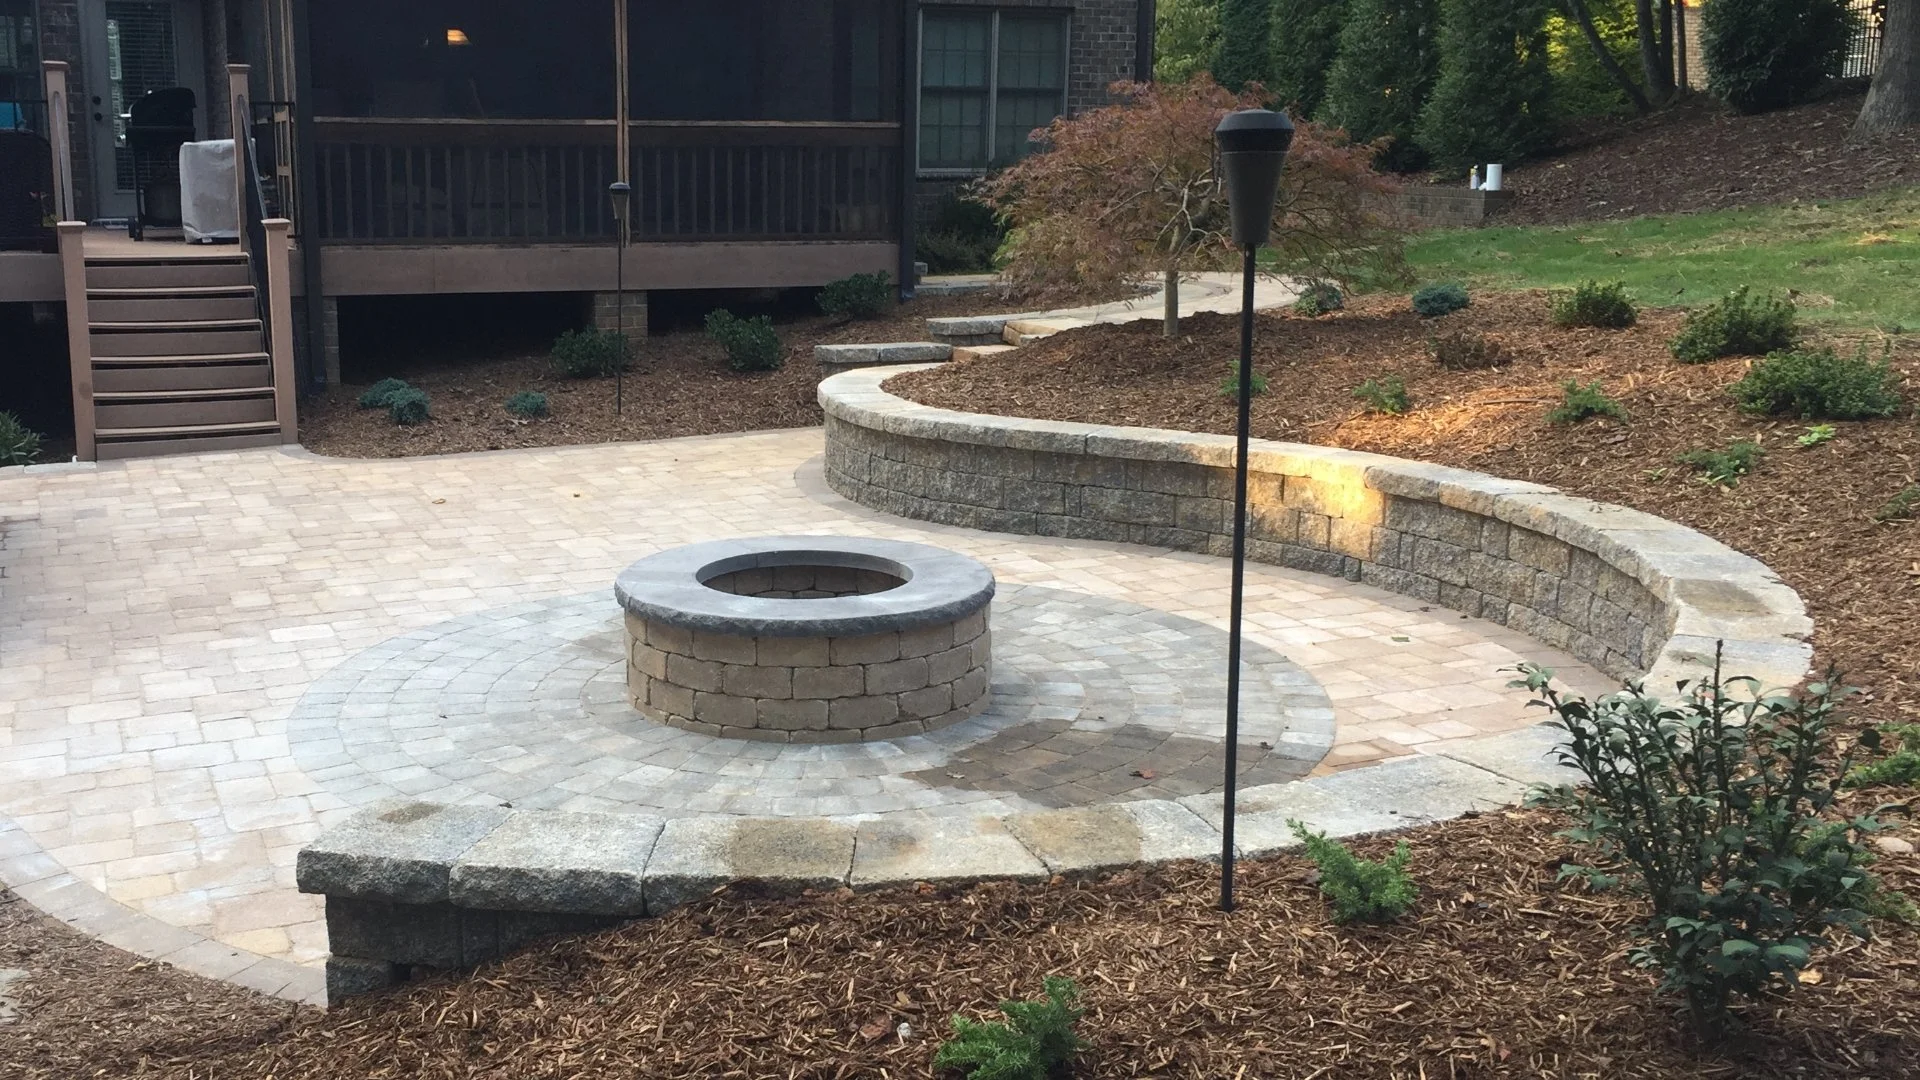 Want to Install a Patio on Your Sloped Yard? You Need a Retaining Wall!